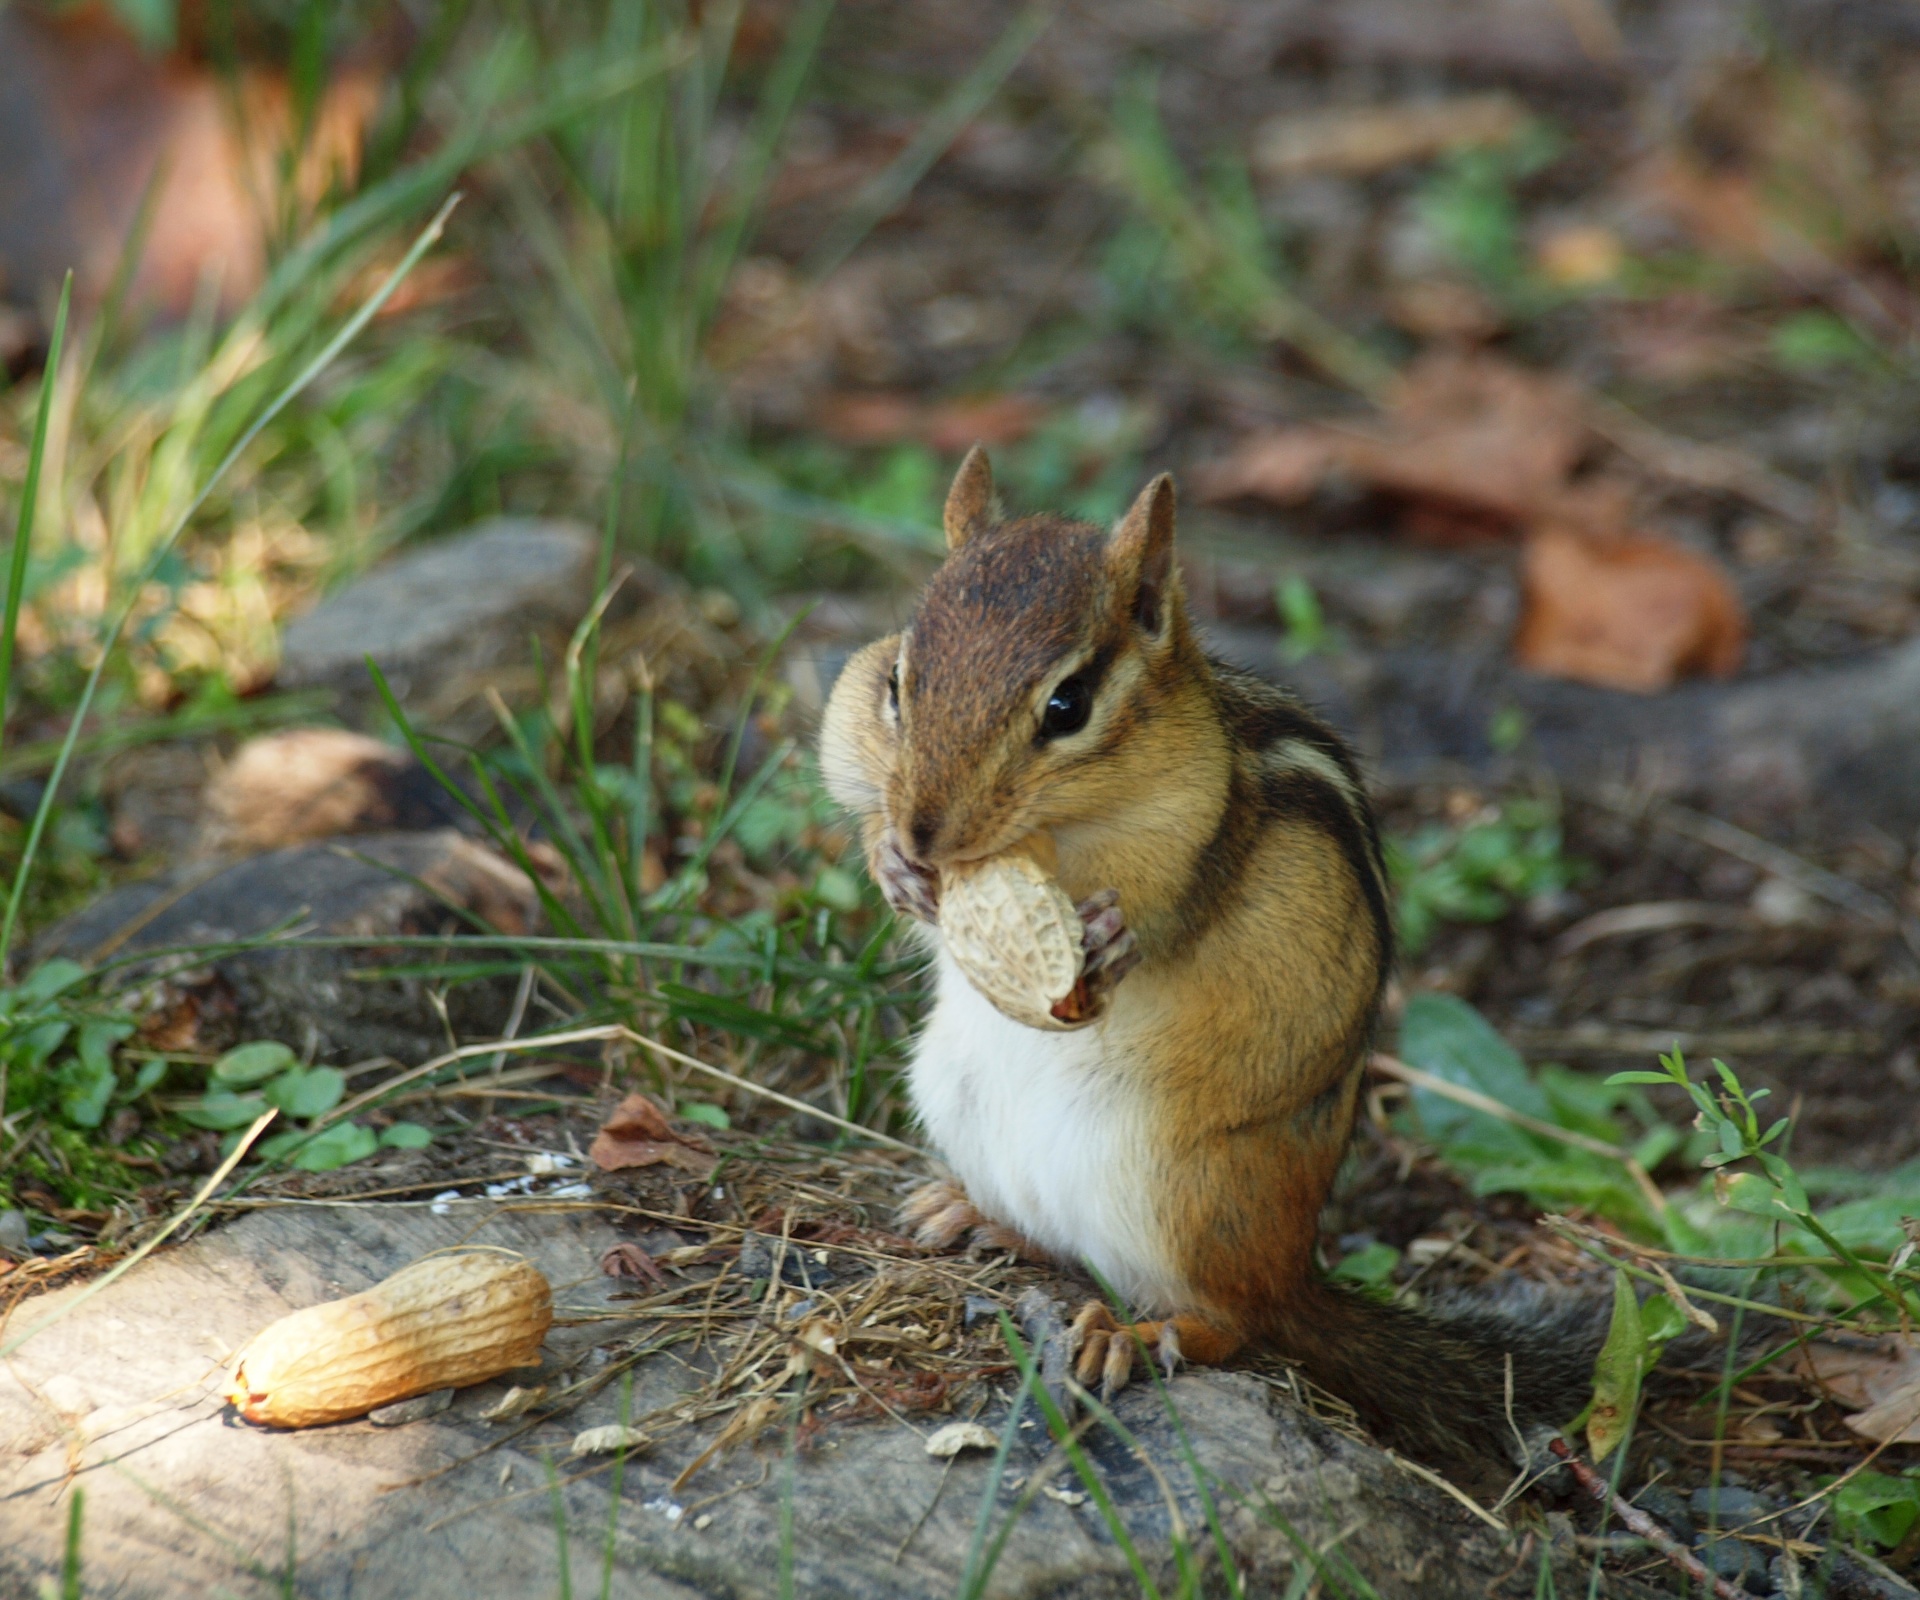 a chipmunk sitting upright on the ground in the shade stuffing an in-shell peanut into its cheeks